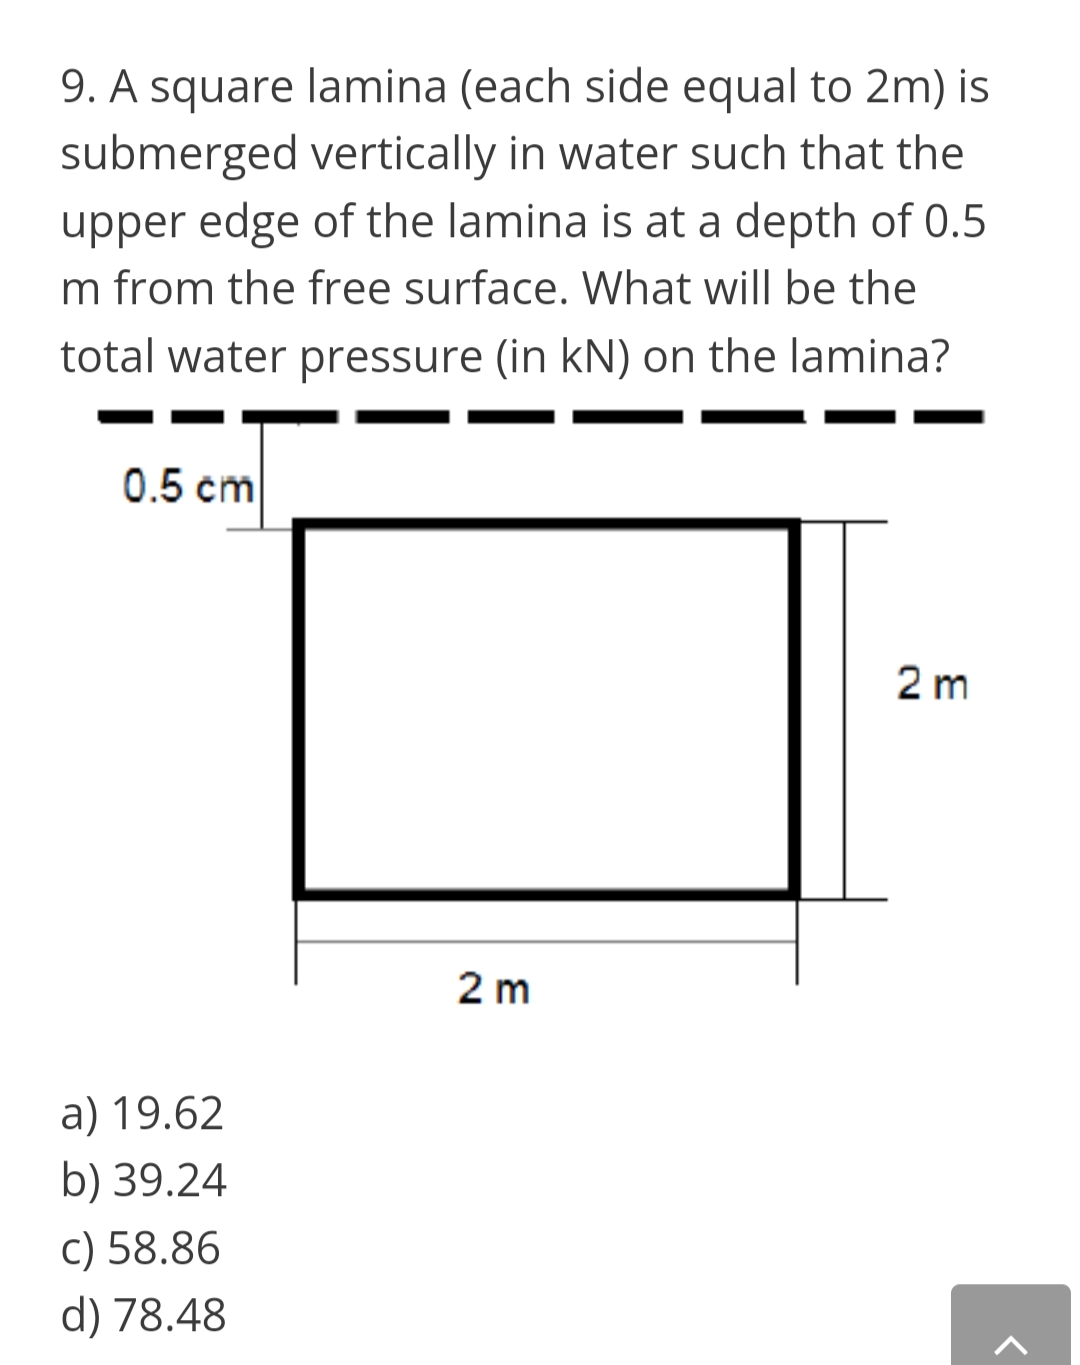 9. A square lamina (each side equal to 2m) is
submerged vertically in water such that the
upper edge of the lamina is at a depth of 0.5
m from the free surface. What will be the
total water pressure (in kN) on the lamina?
0.5 cm
2 m
2 m
a) 19.62
b) 39.24
c) 58.86
d) 78.48
